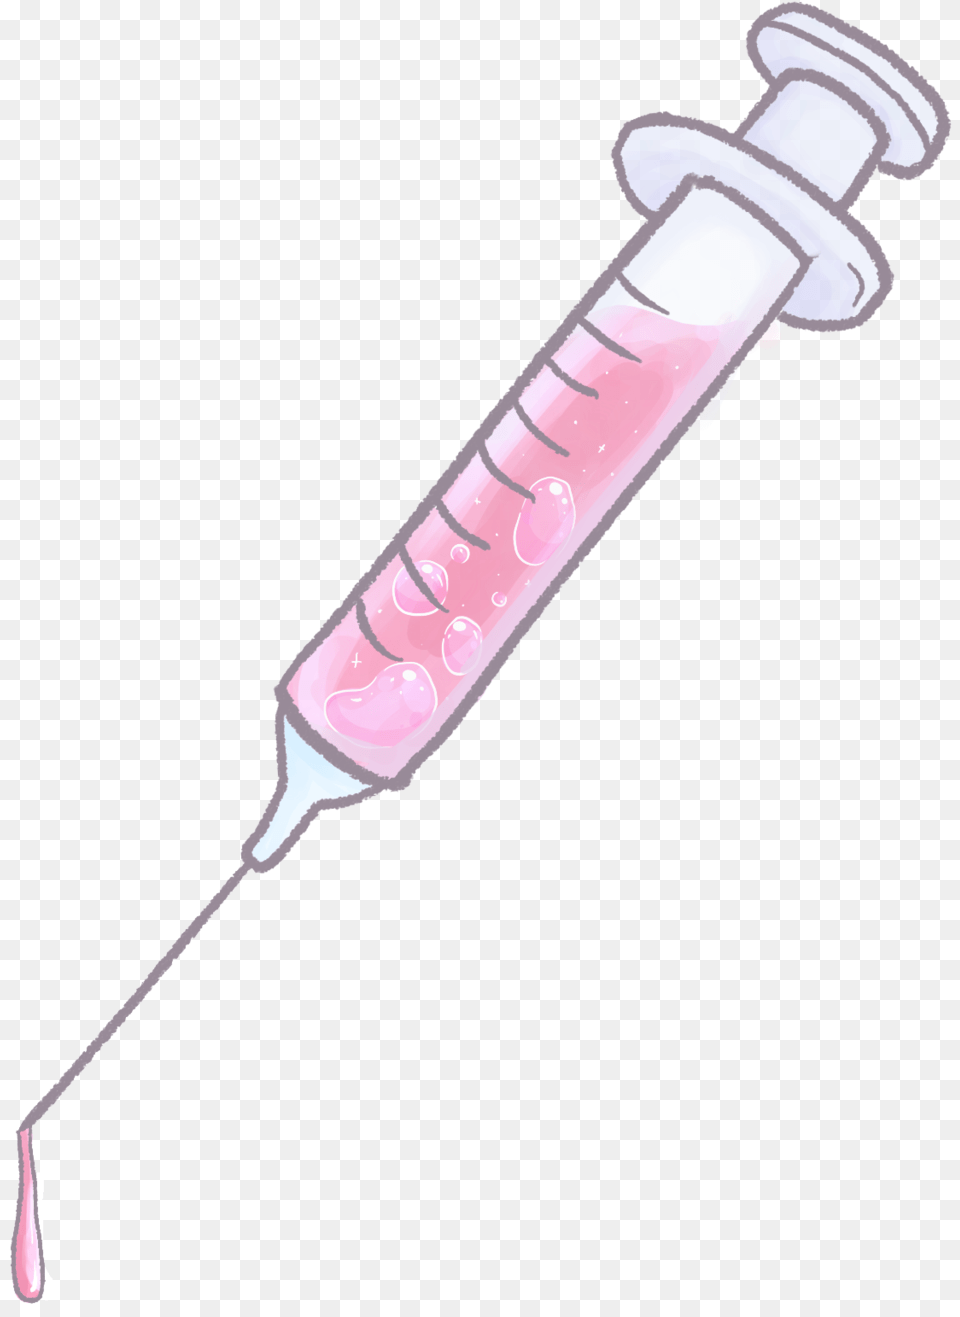 Syringe Clipart Tumblr Syringe Drawings Syringe Clipart Background, Injection, Dynamite, Weapon, Smoke Pipe Free Png Download